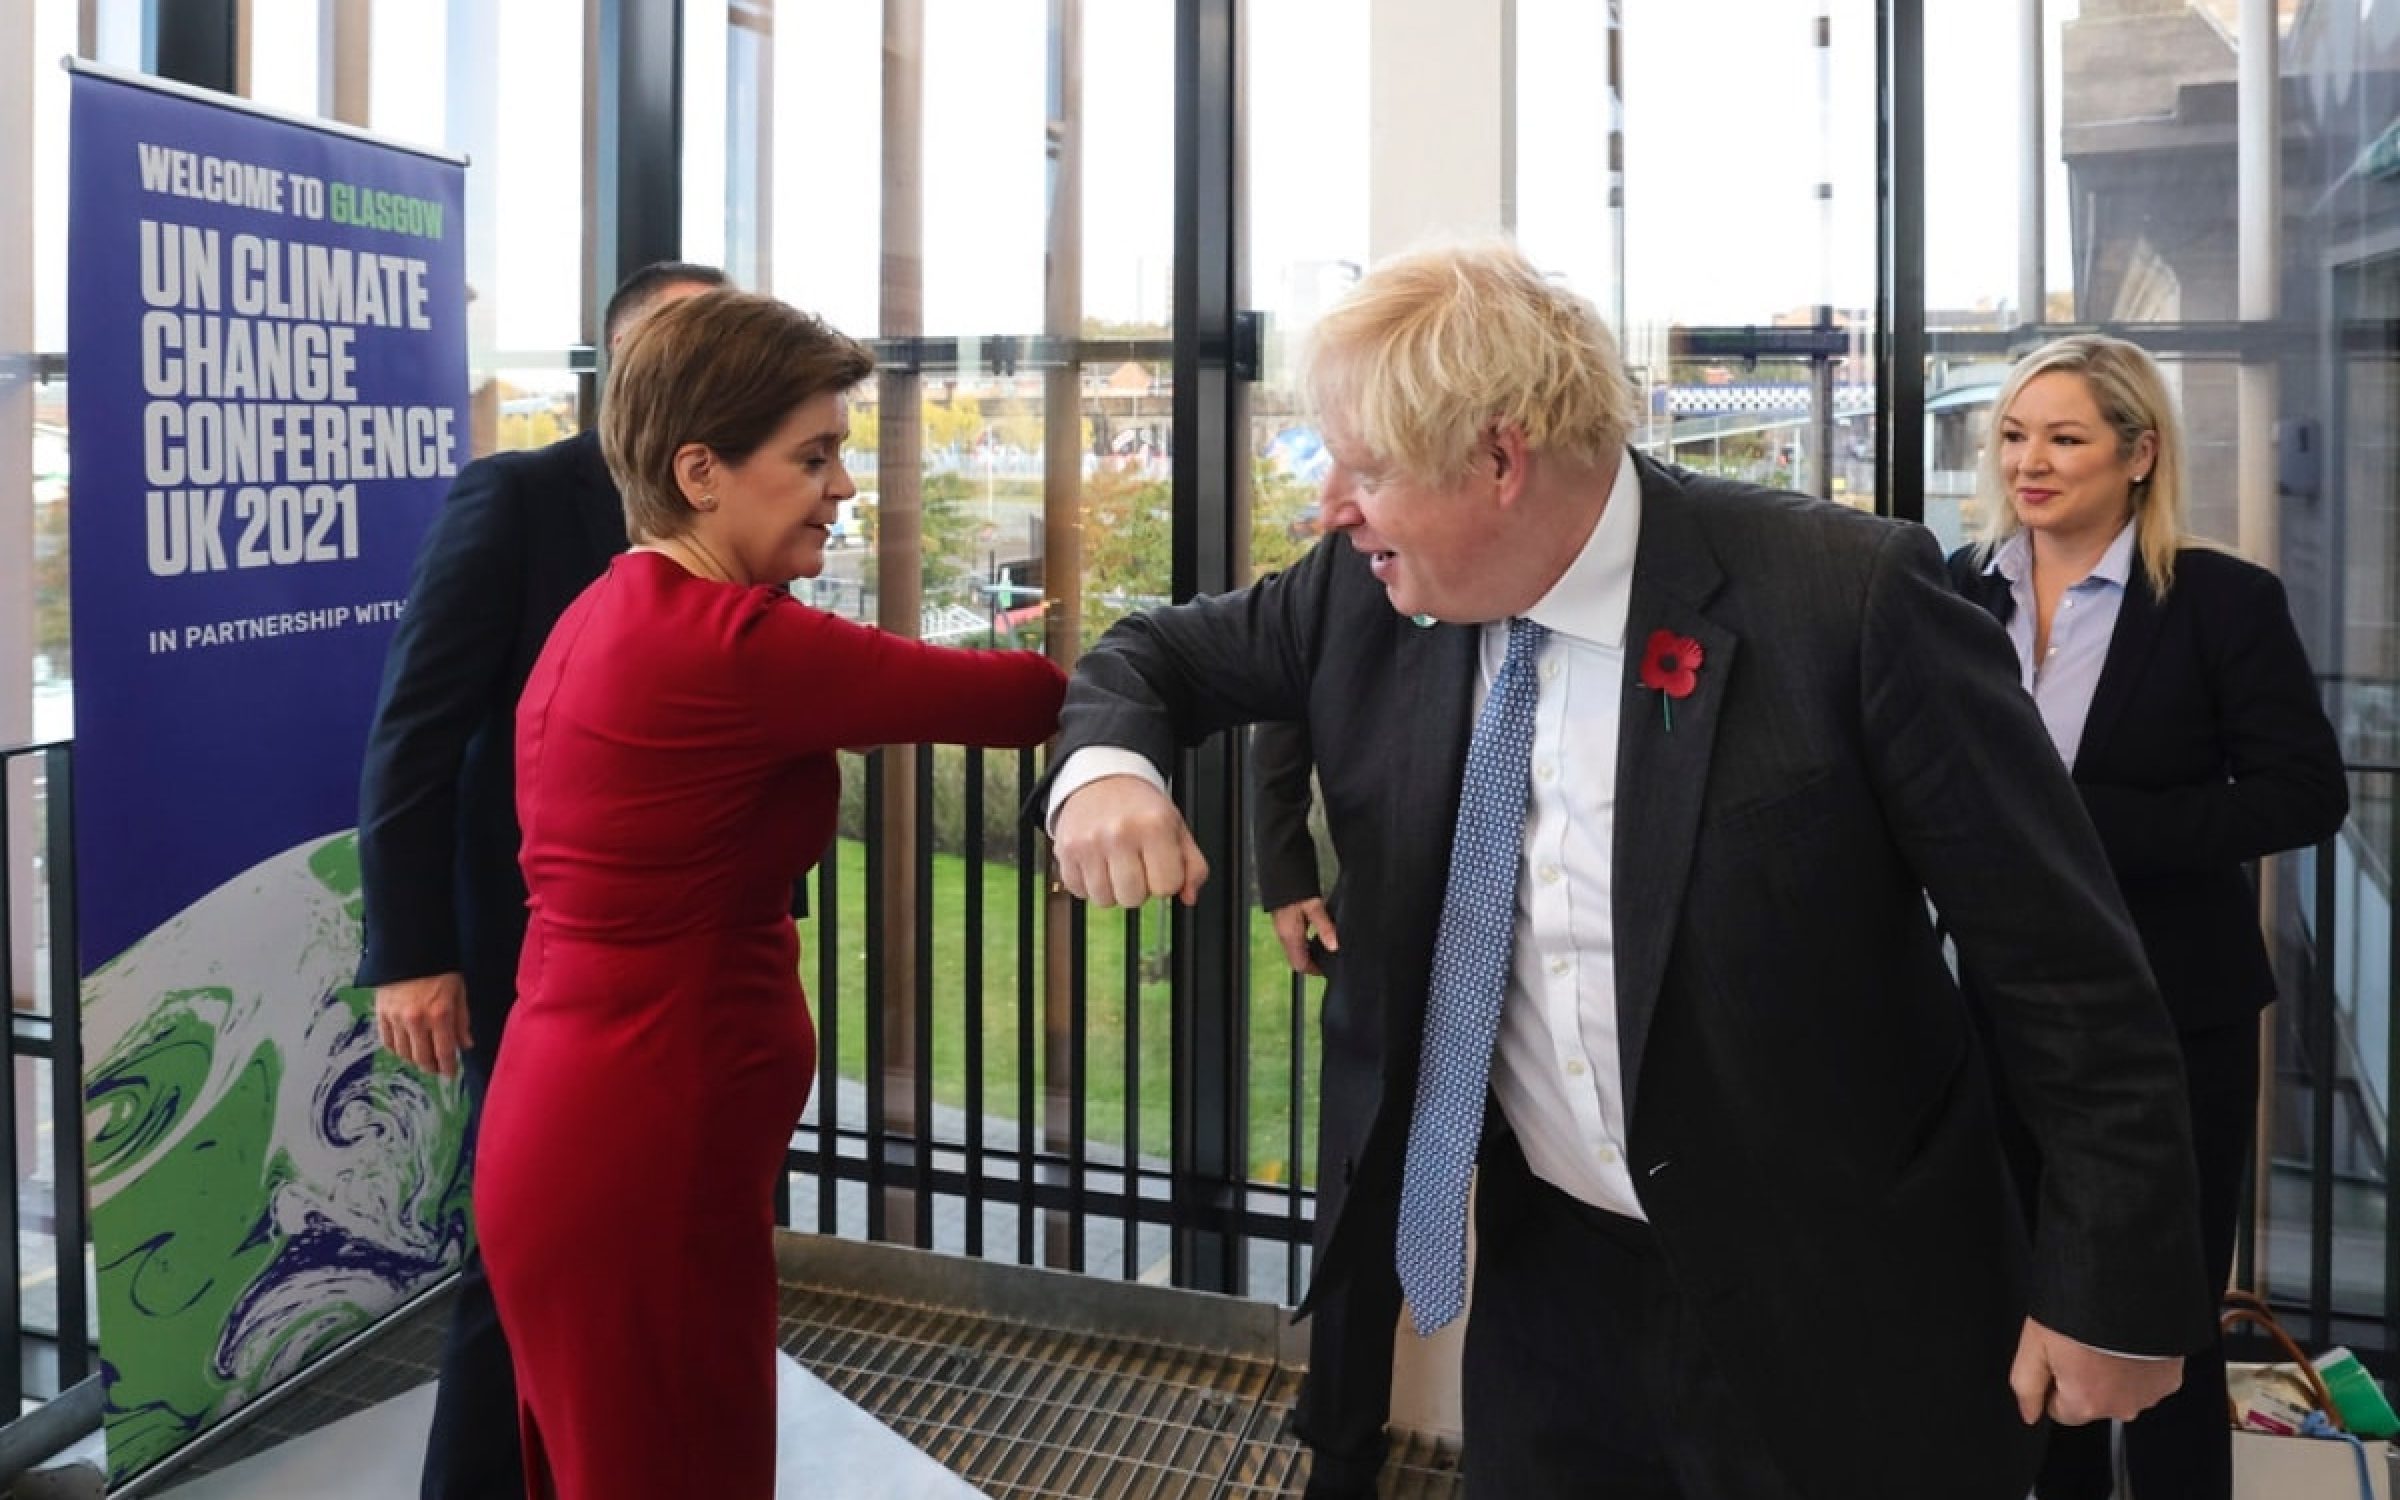 02/11/2021. Glasgow, United Kingdom. Boris Johnson -COP26 World Leaders Summit Day 2. The Prime Minister Boris Johnson greets Scotlands First Leader Nicola Sturgeon as he attends day two of the COP26 World Leaders Summit. Picture by Andrew Parsons / No 10 Downing Street